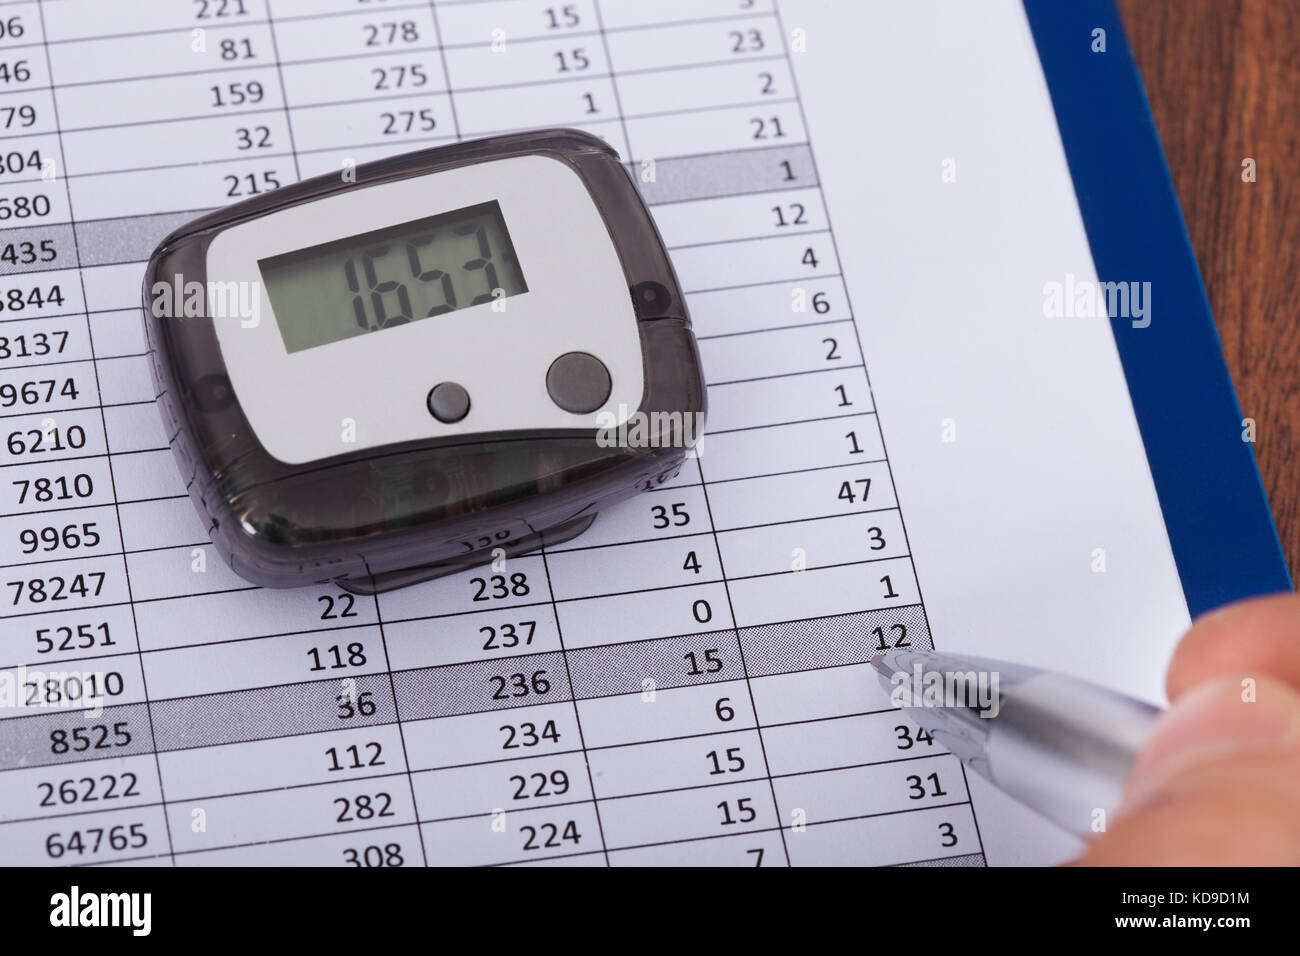 Close-up Of Hand Holding Pen Over Sheet With Digital Pedometer Stock Photo